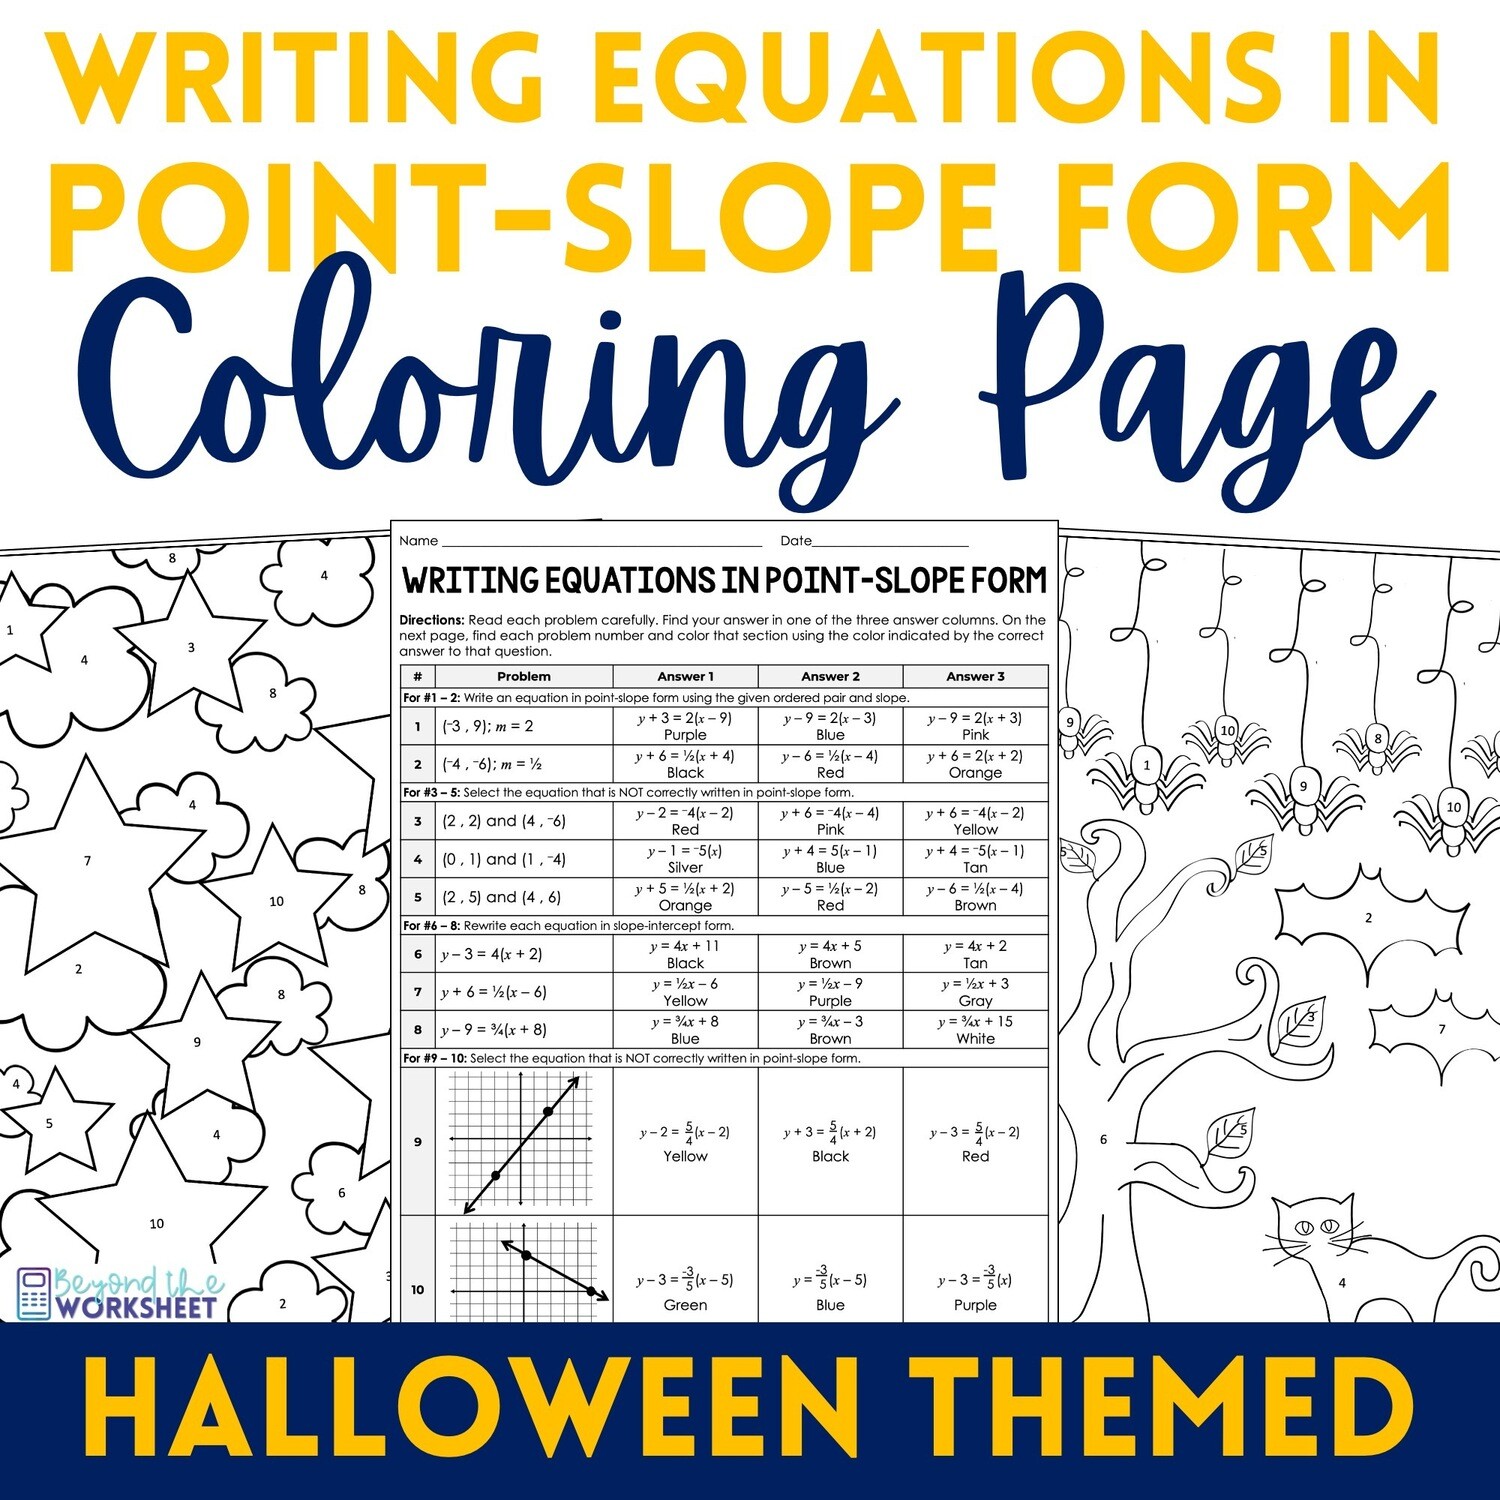 Writing Equations in Point Slope Form Coloring Worksheet (Halloween and Generic Theme)